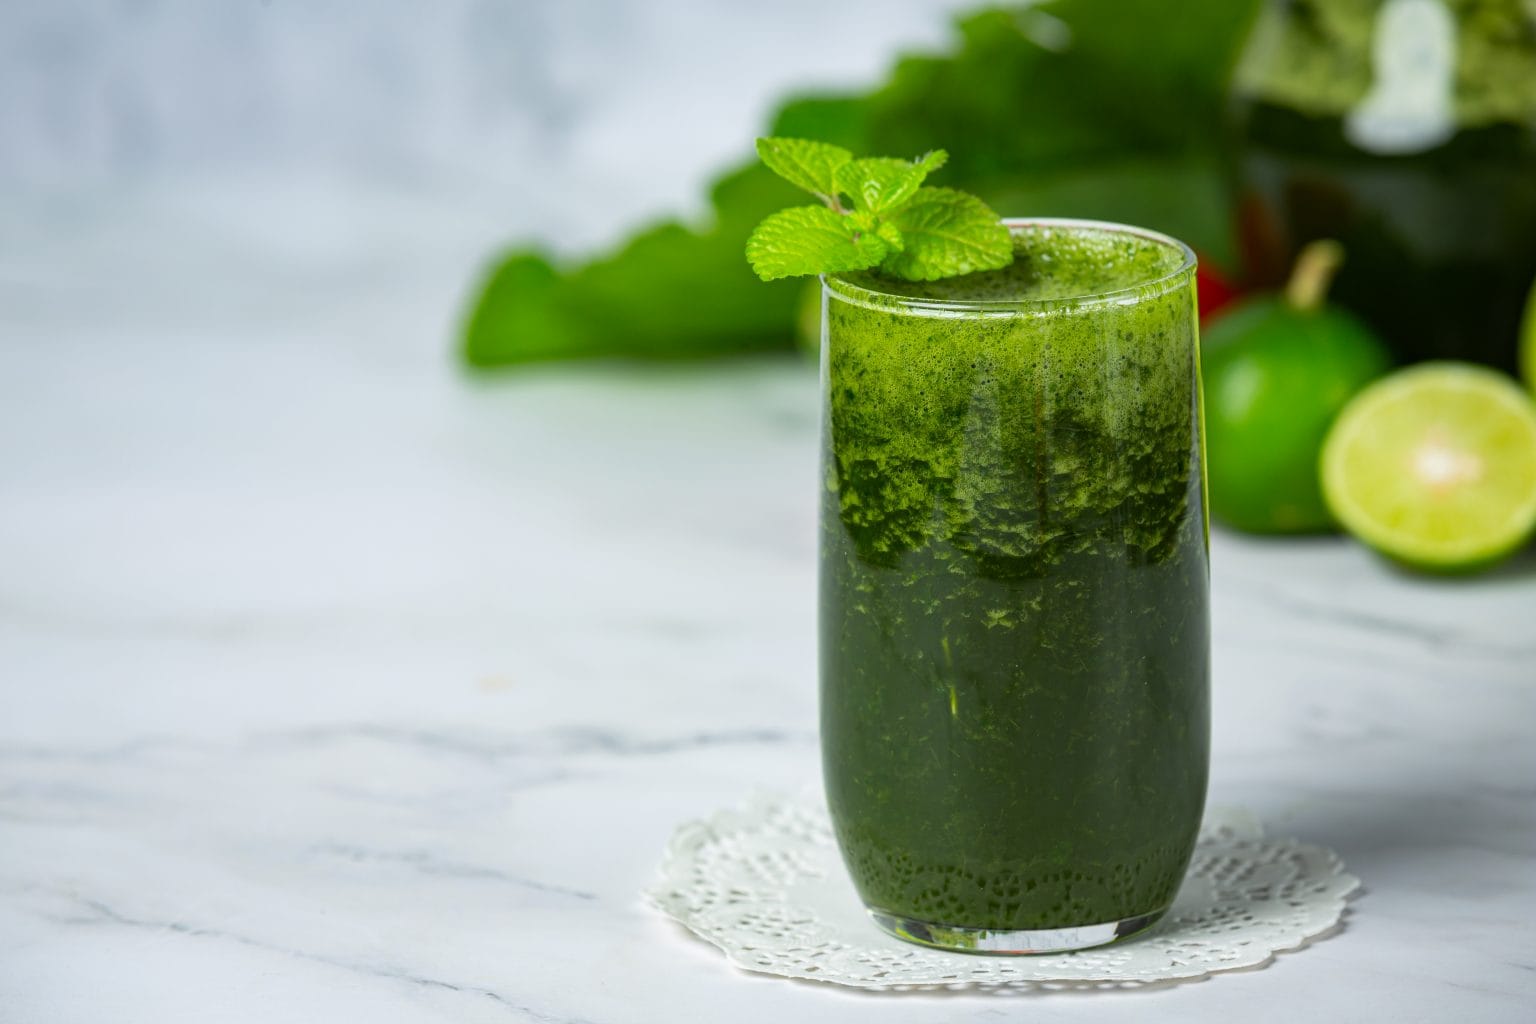 First Watch Kale Tonic Recipe A Simple & Delicious Detox Blend of Bites